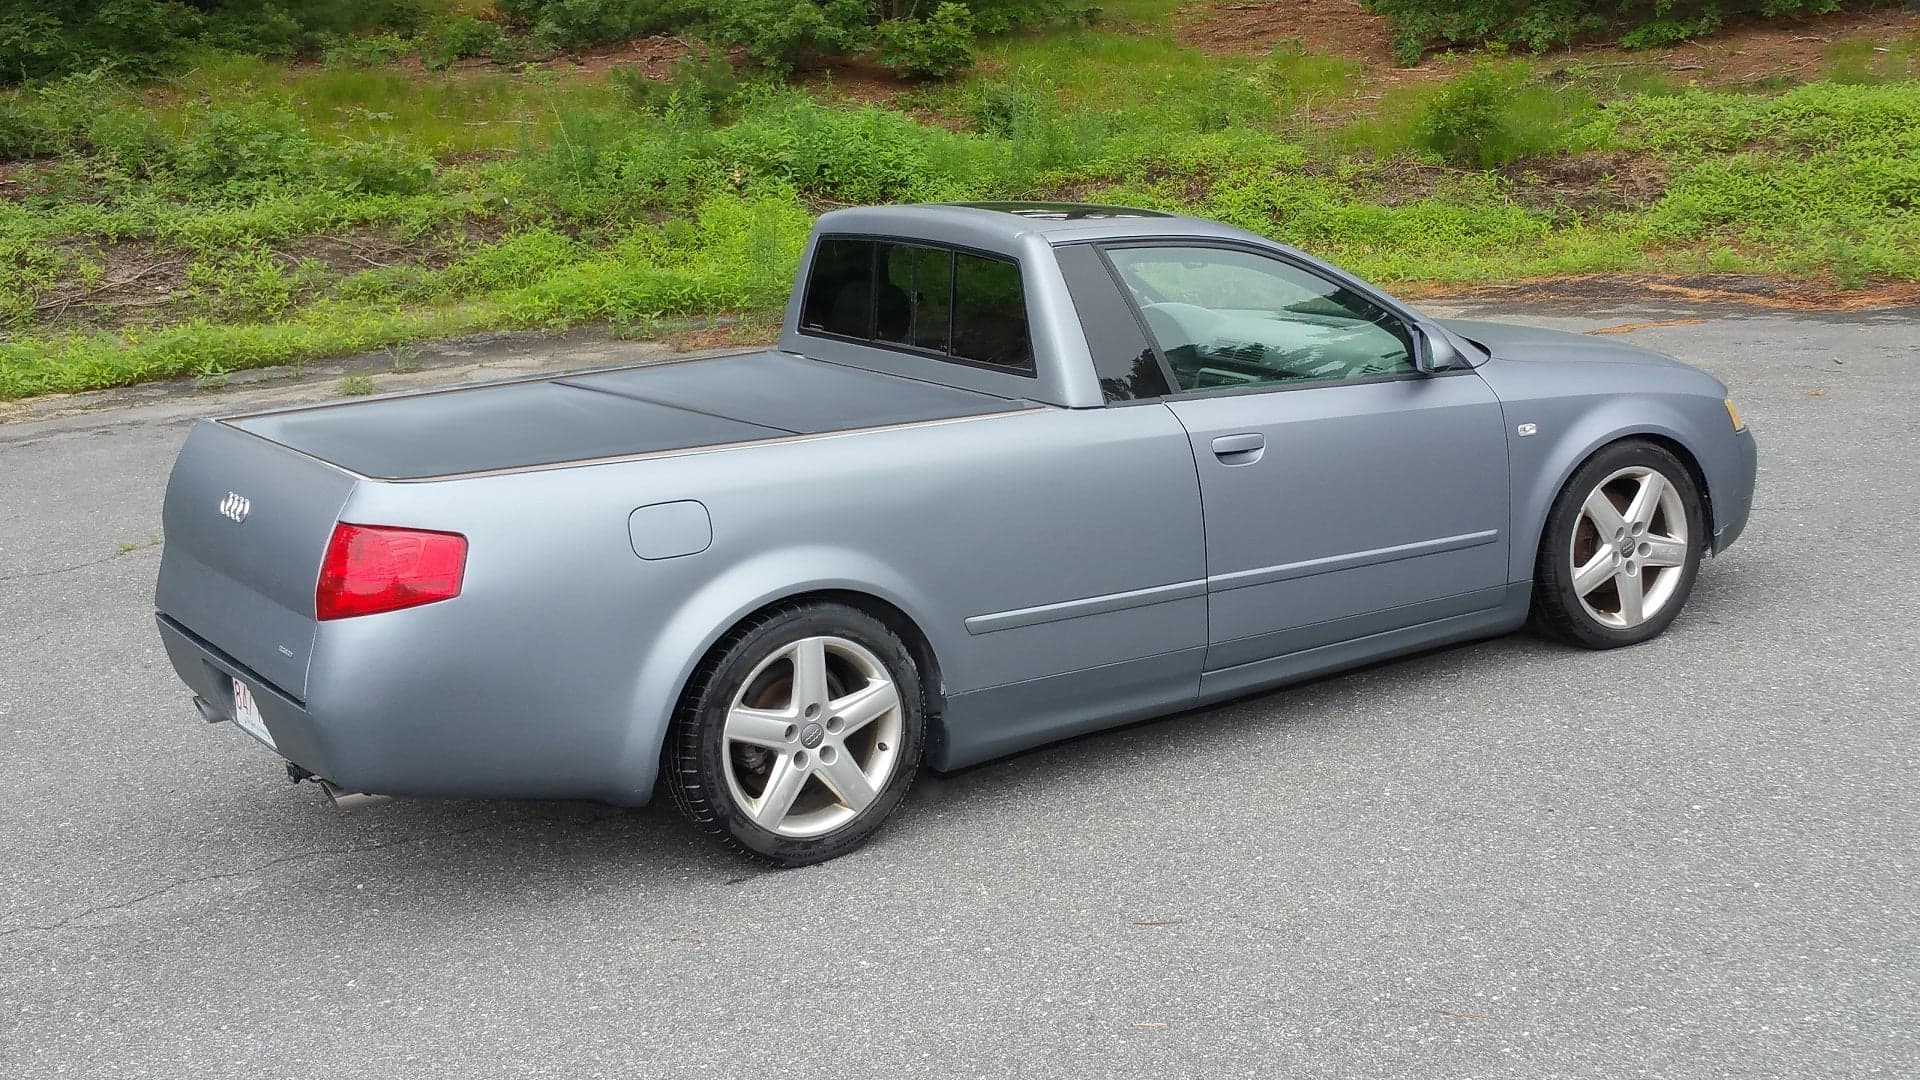 You Can Now Own an Audi S4 Ute Thanks to Smyth Performance